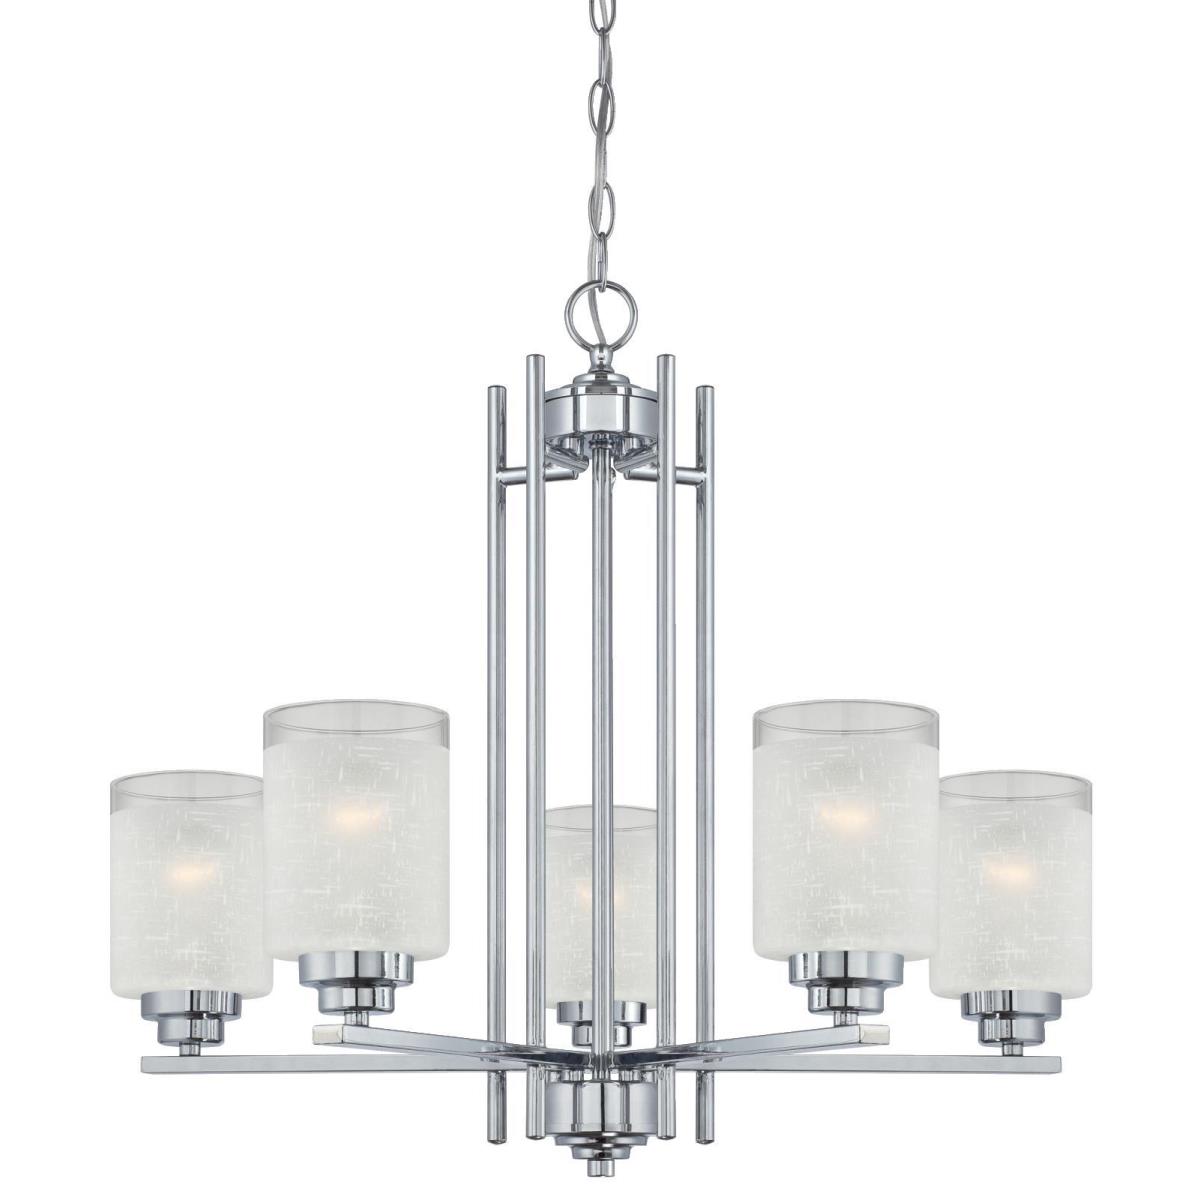 5 Light Chandelier Chrome Finish with White Linen Glass and Translucent Band